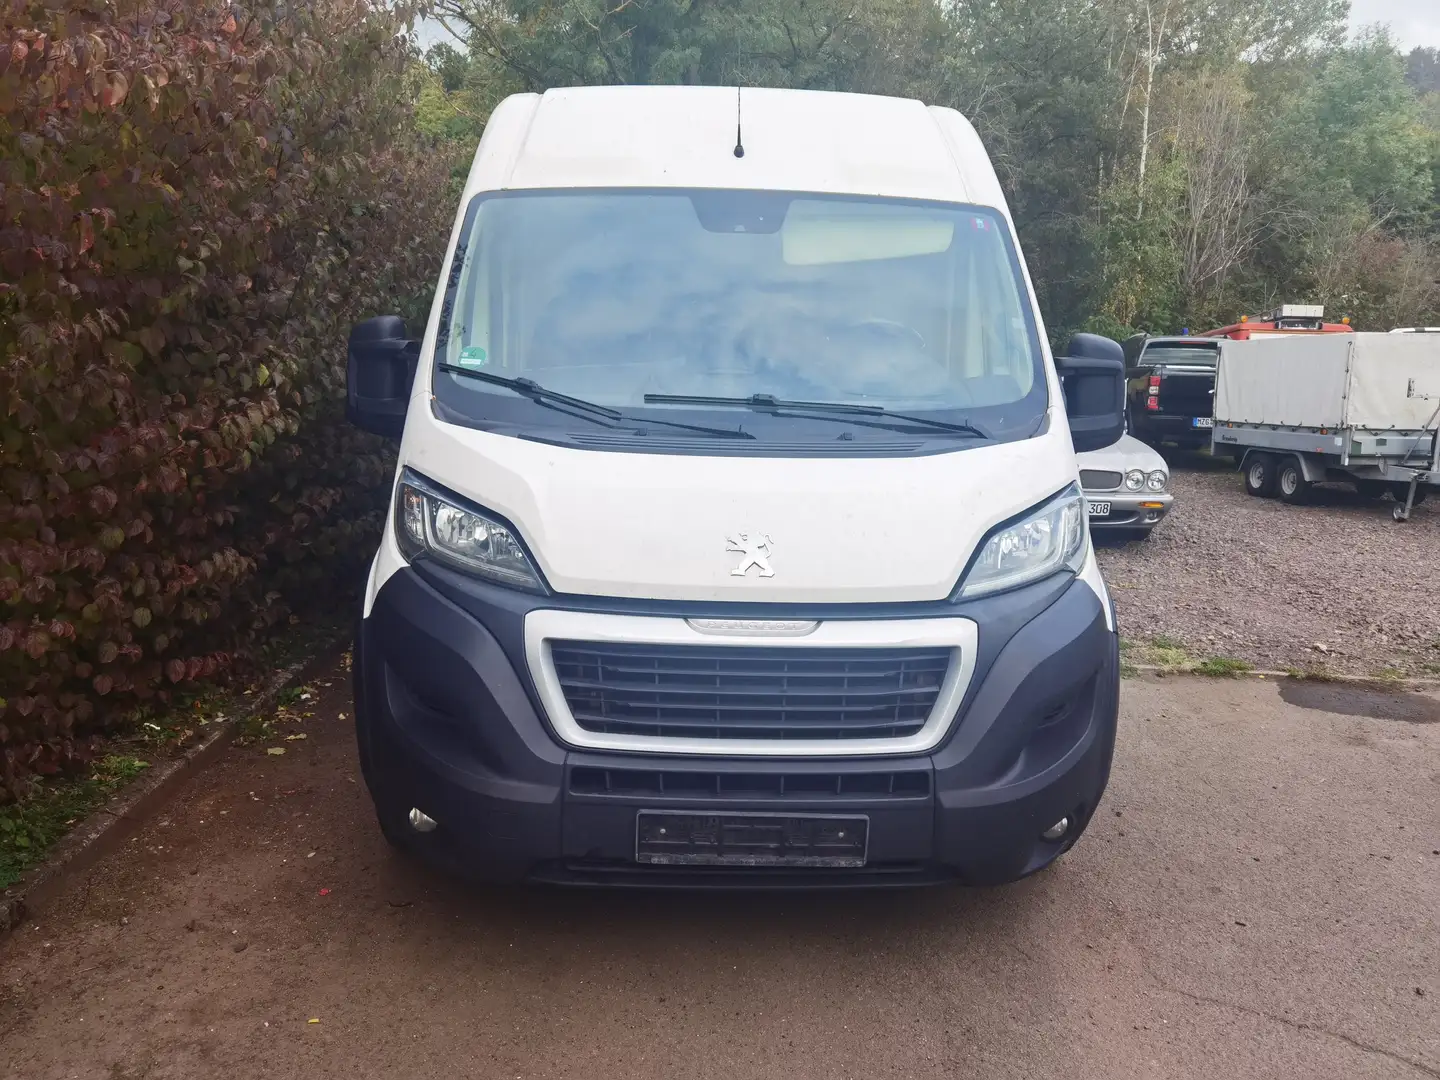 Peugeot Boxer 2,0l HDI 163PS Extra Lang und Hoch Navi Bianco - 2